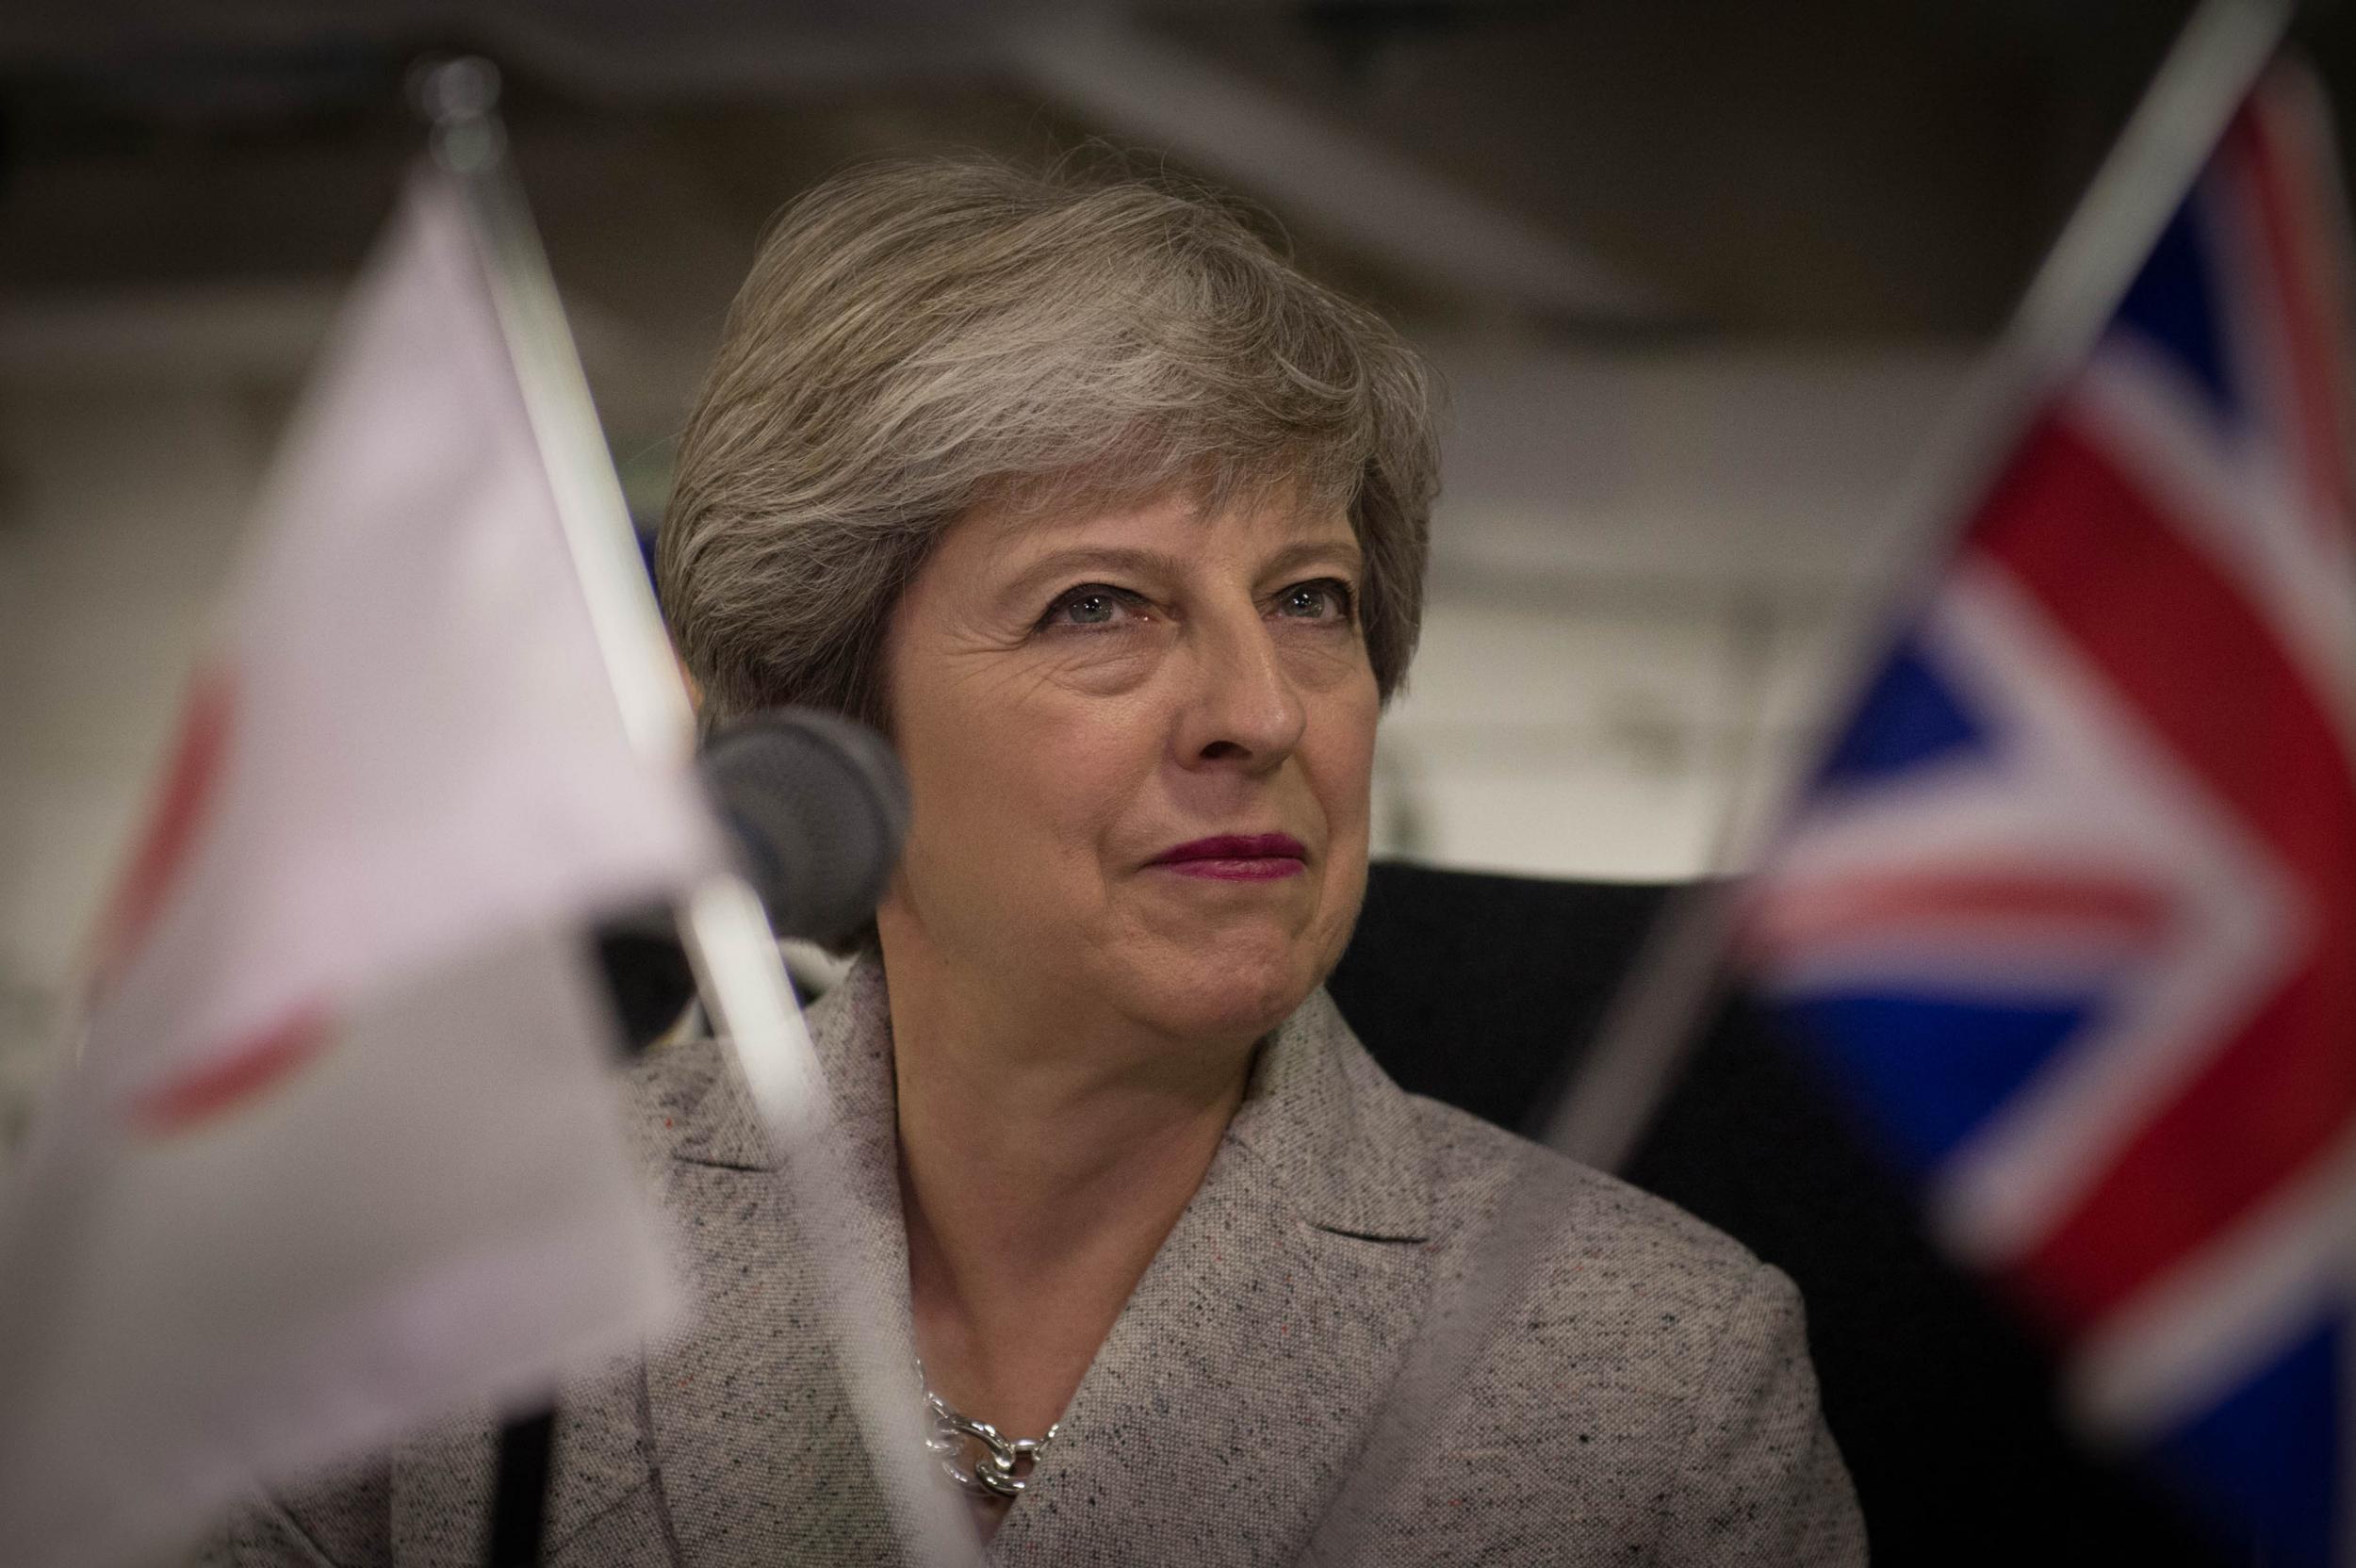 Ms May has pledged her intention to stay as Prime Minister for the 2022 general election